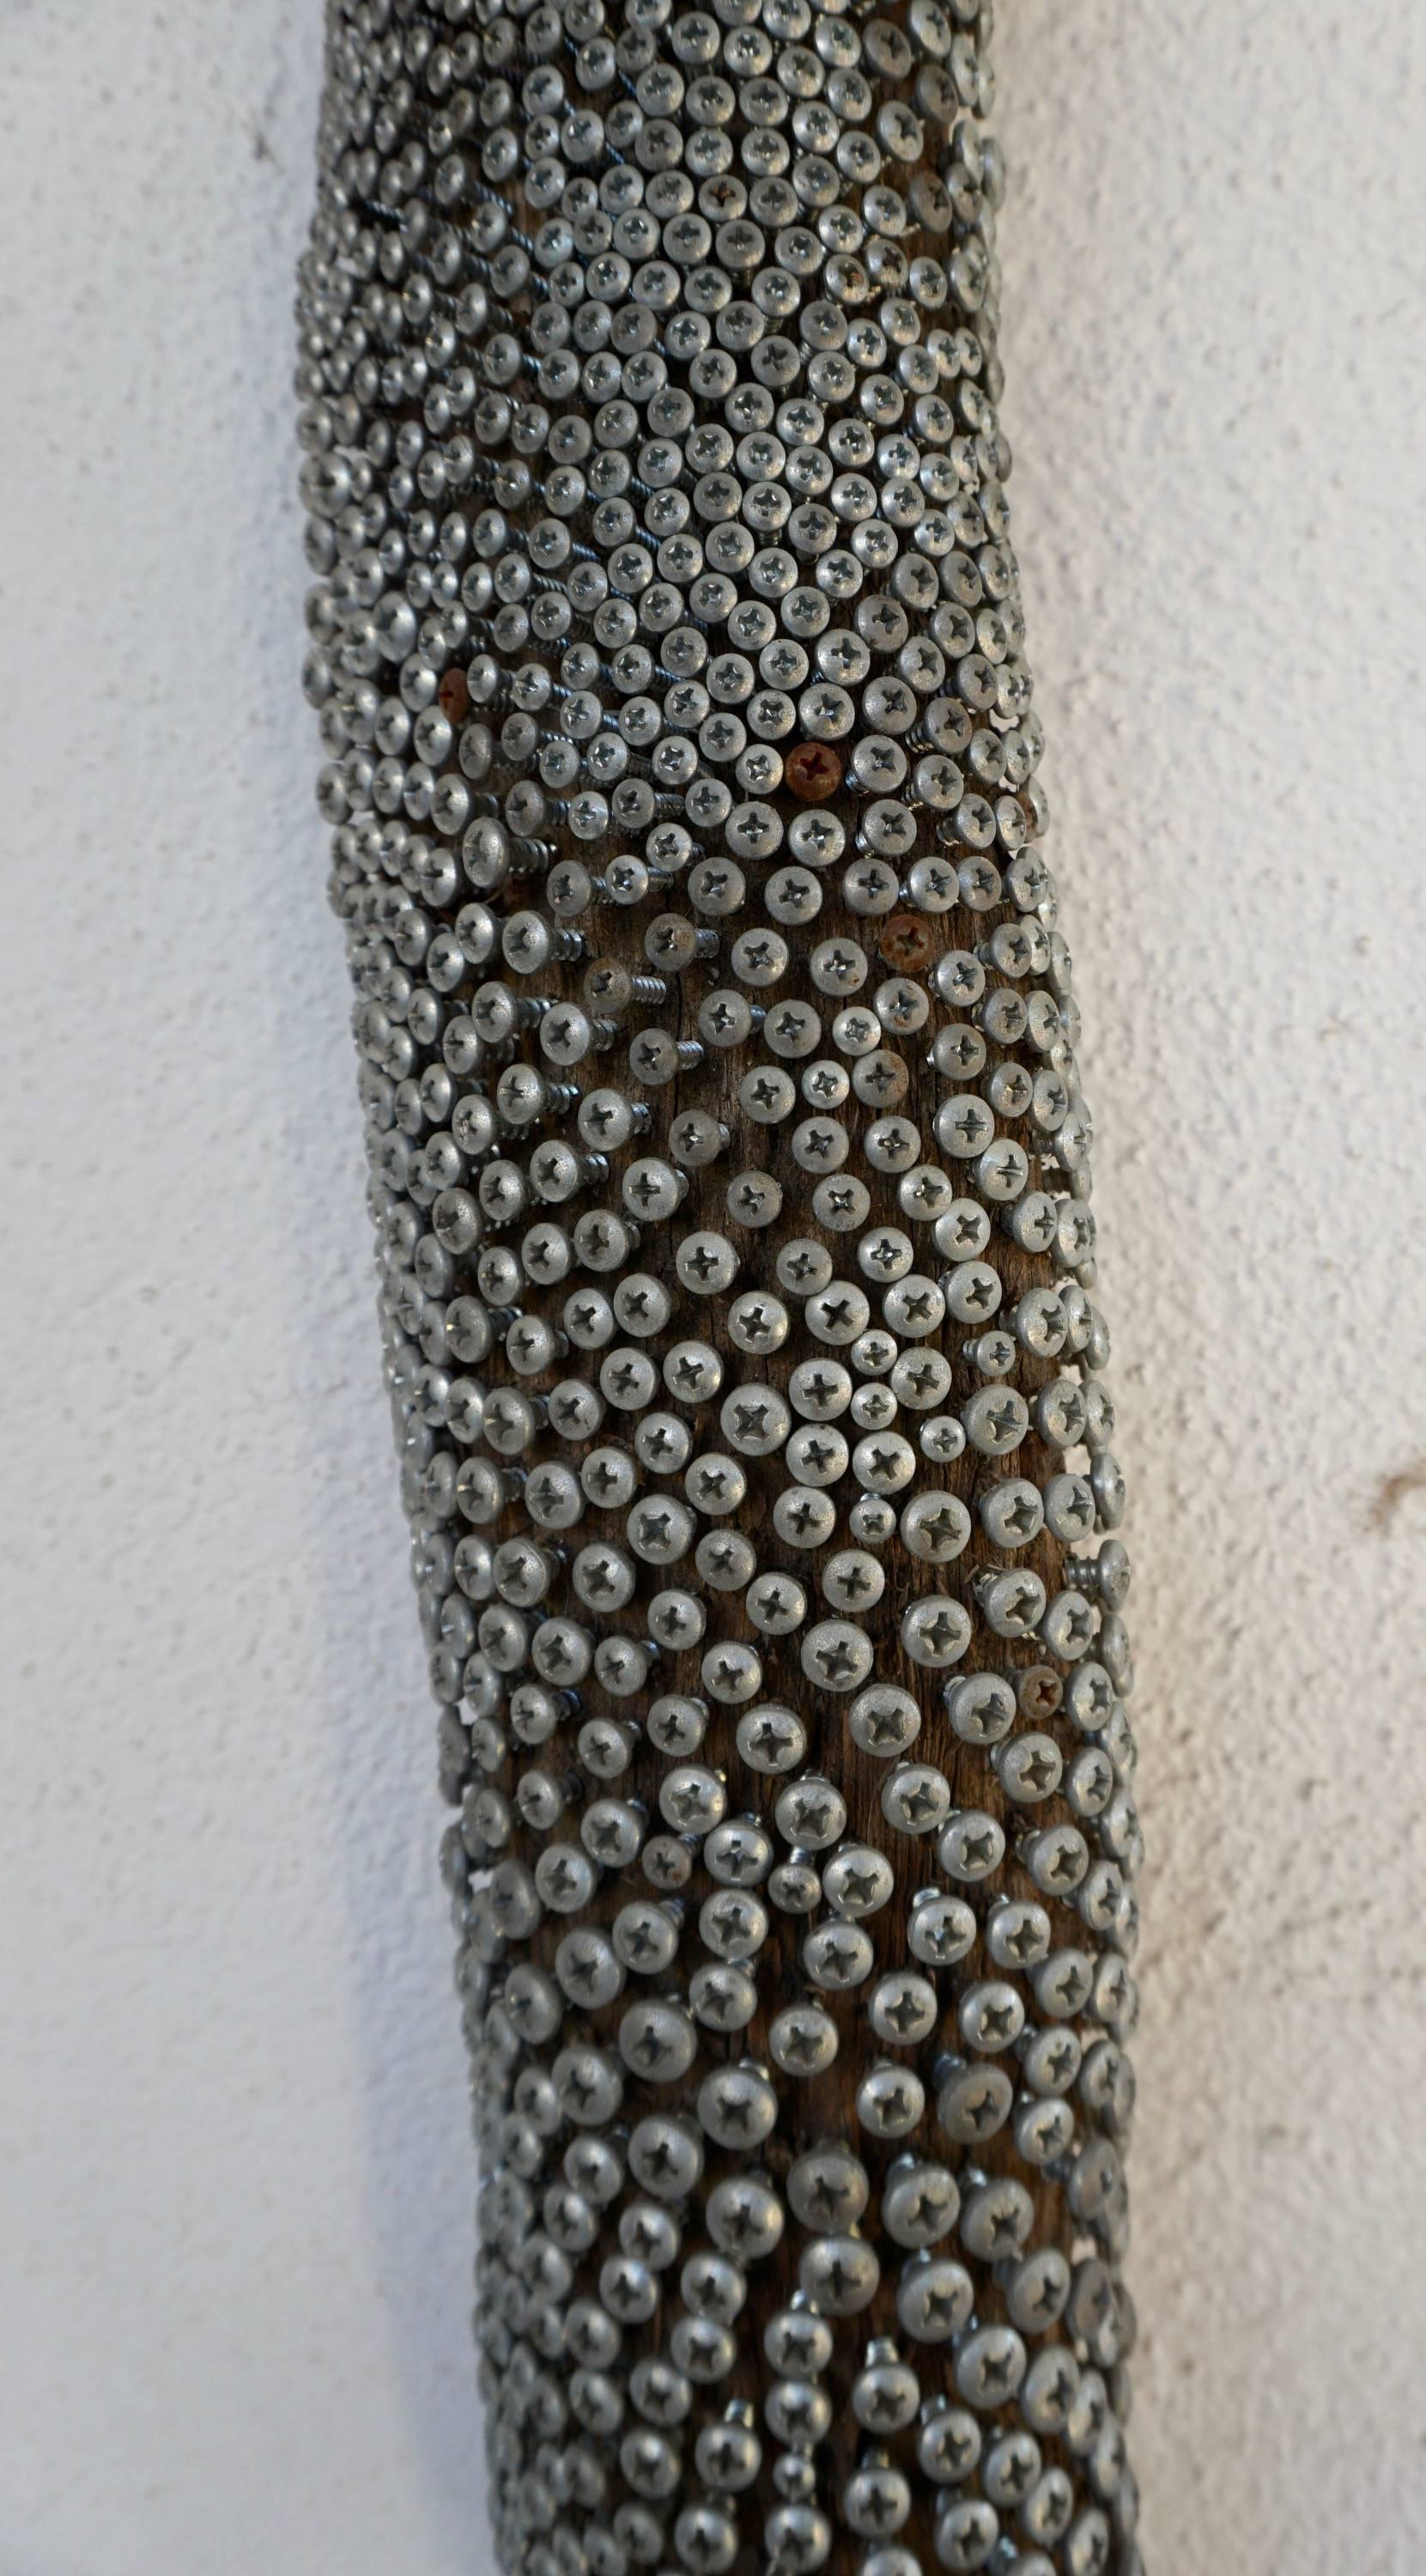 100s of Phillips screws screwed into a piece of driftwood creating a one of a kind, mesmerizing wall sculpture.
A form of obsessive art where repetition plays a significant role.